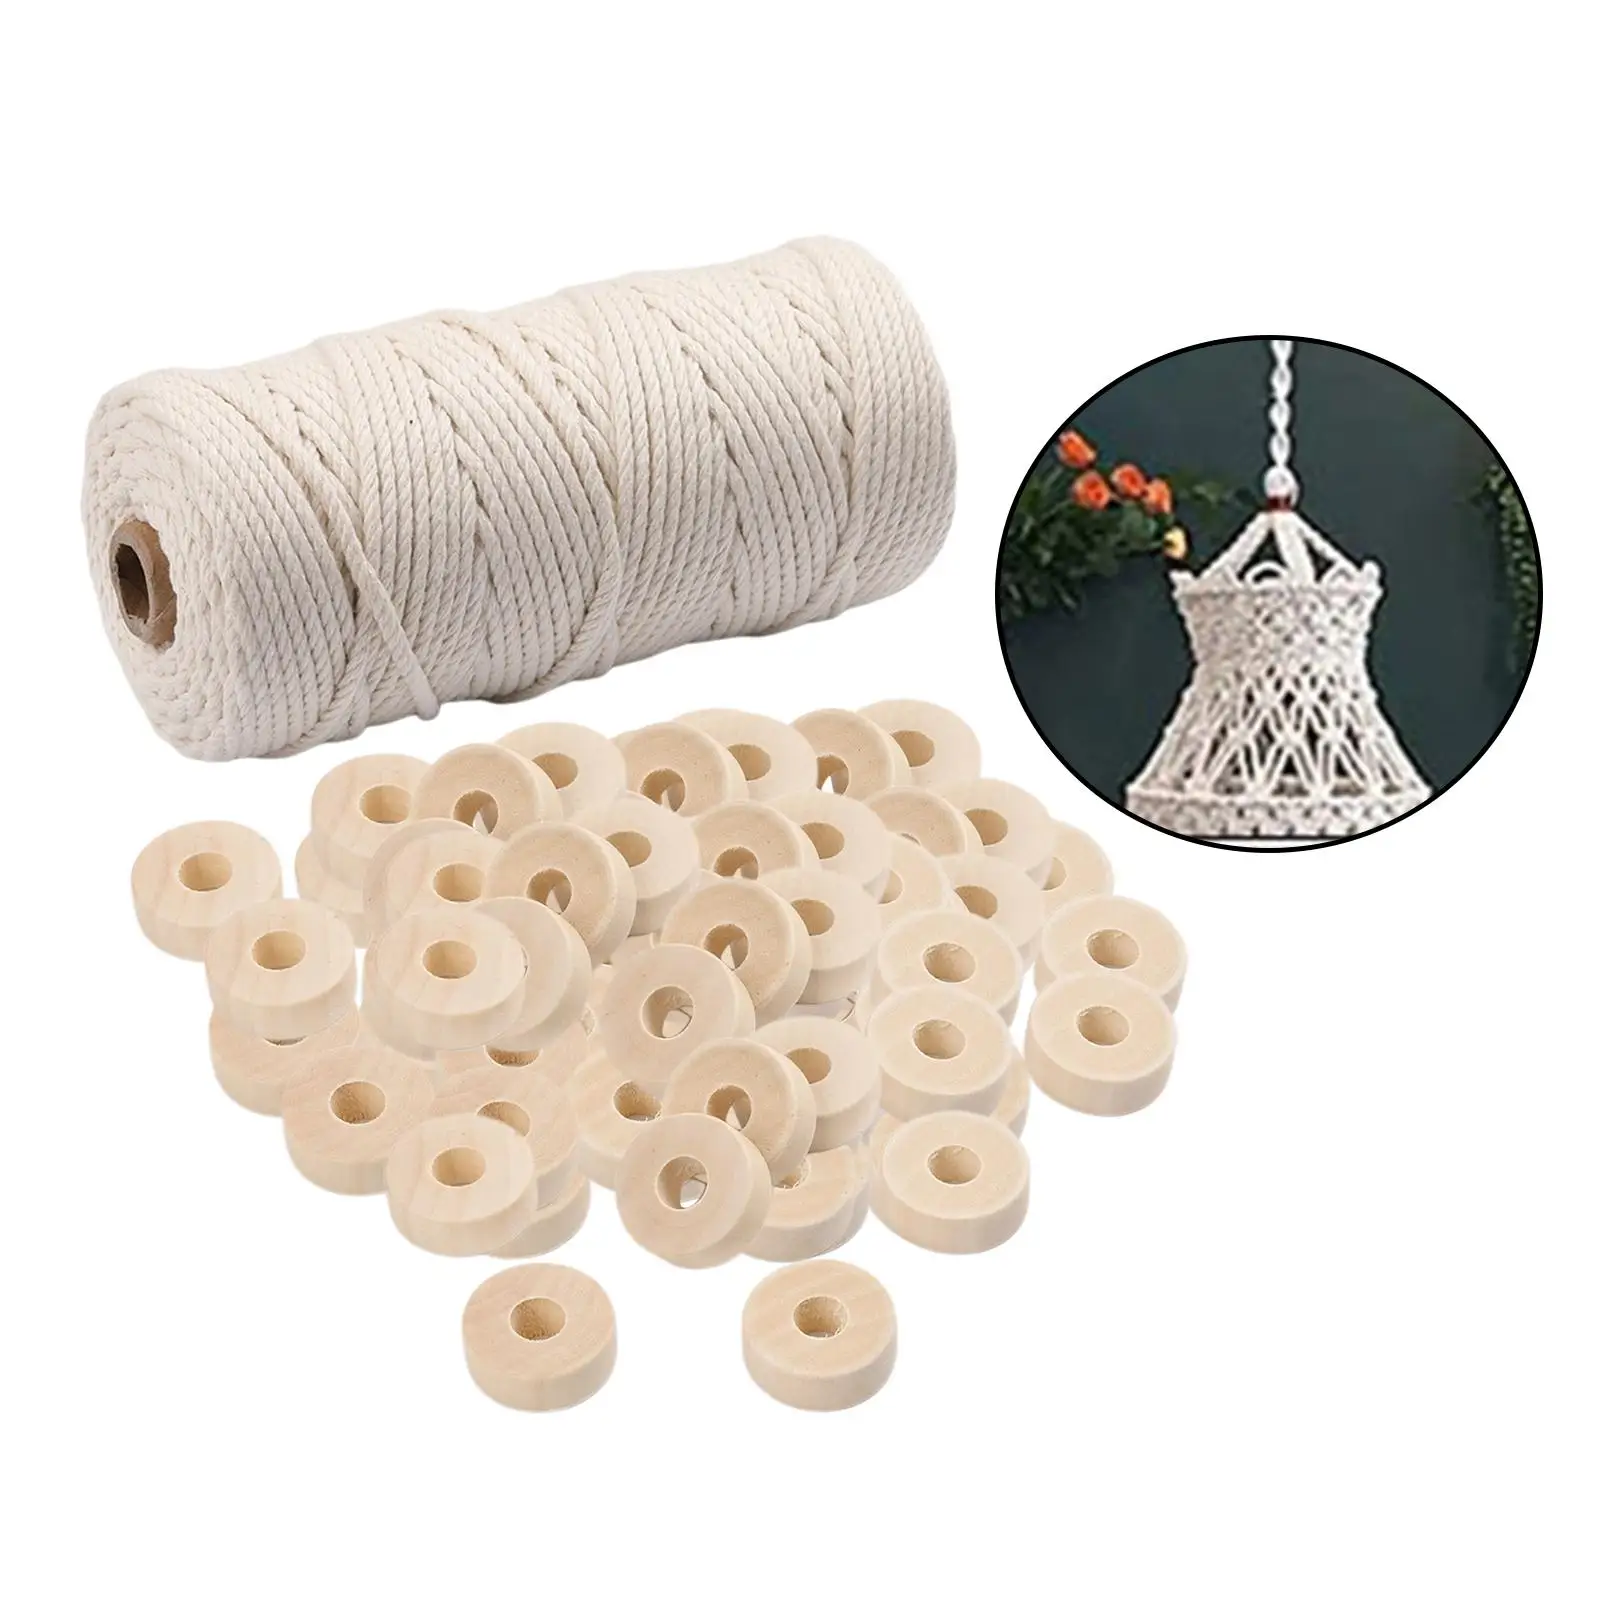 Macrame Cord 3mm x 100m,   Cotton Rope Craft String Twine for Wall Hanging Plant Hangers Knitting, Home Wedding Decorations